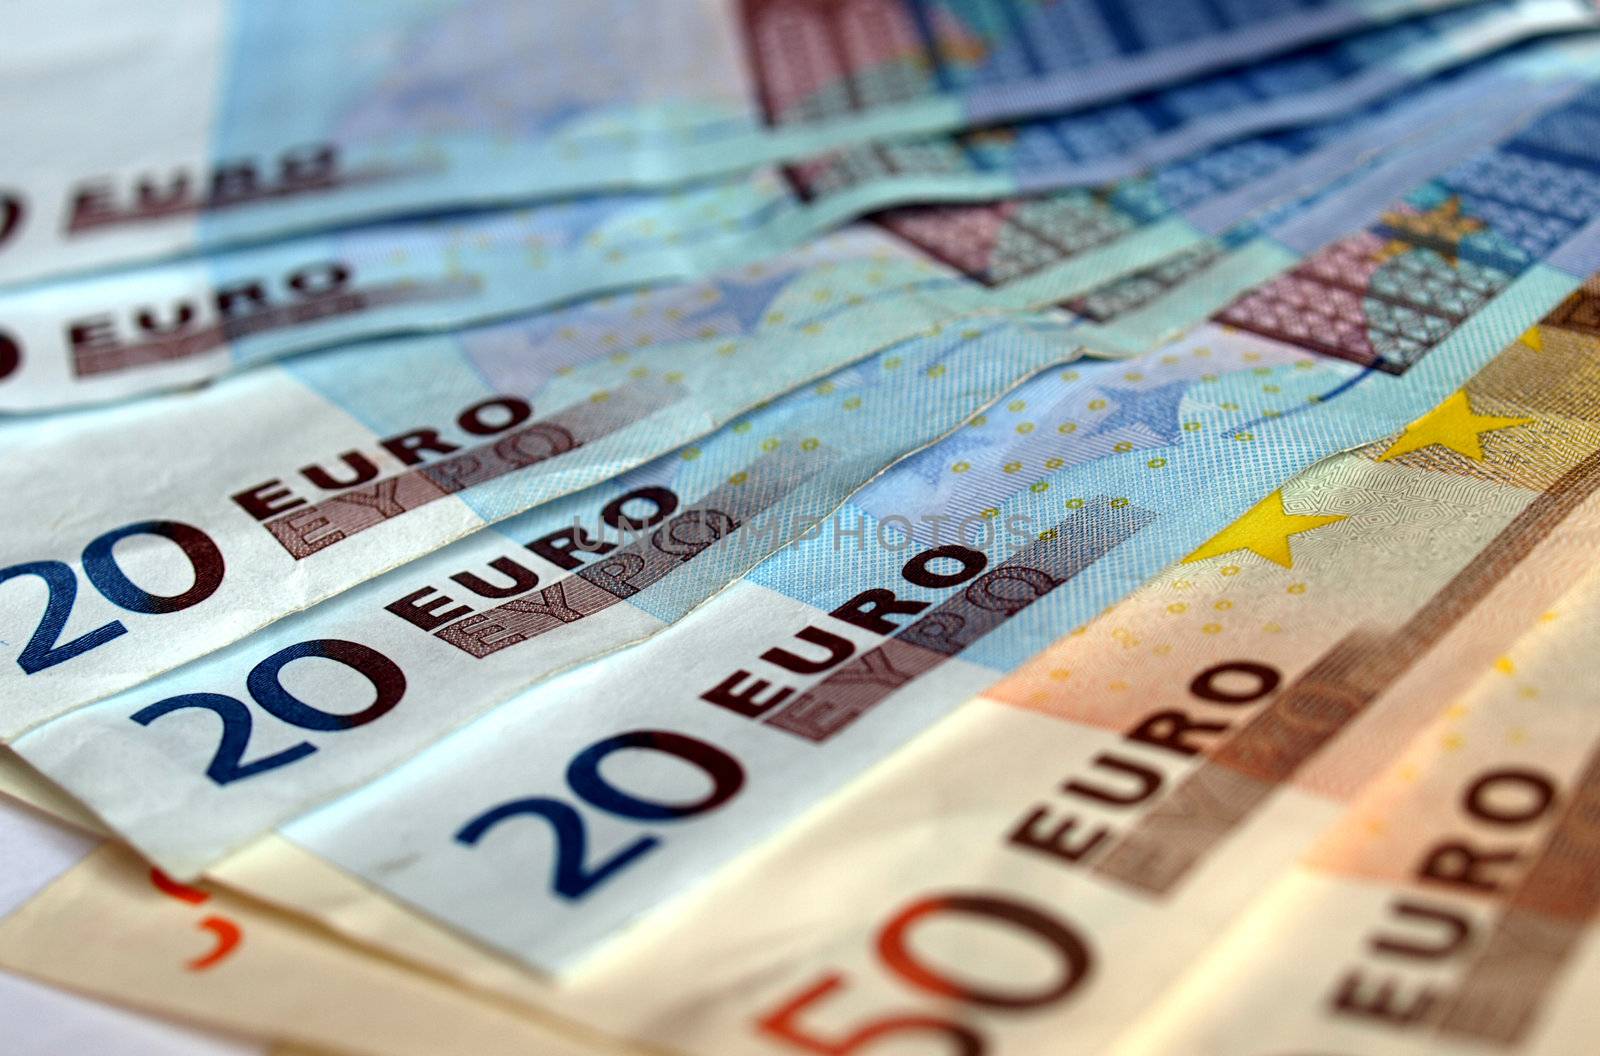 Euro banknotes money european currency